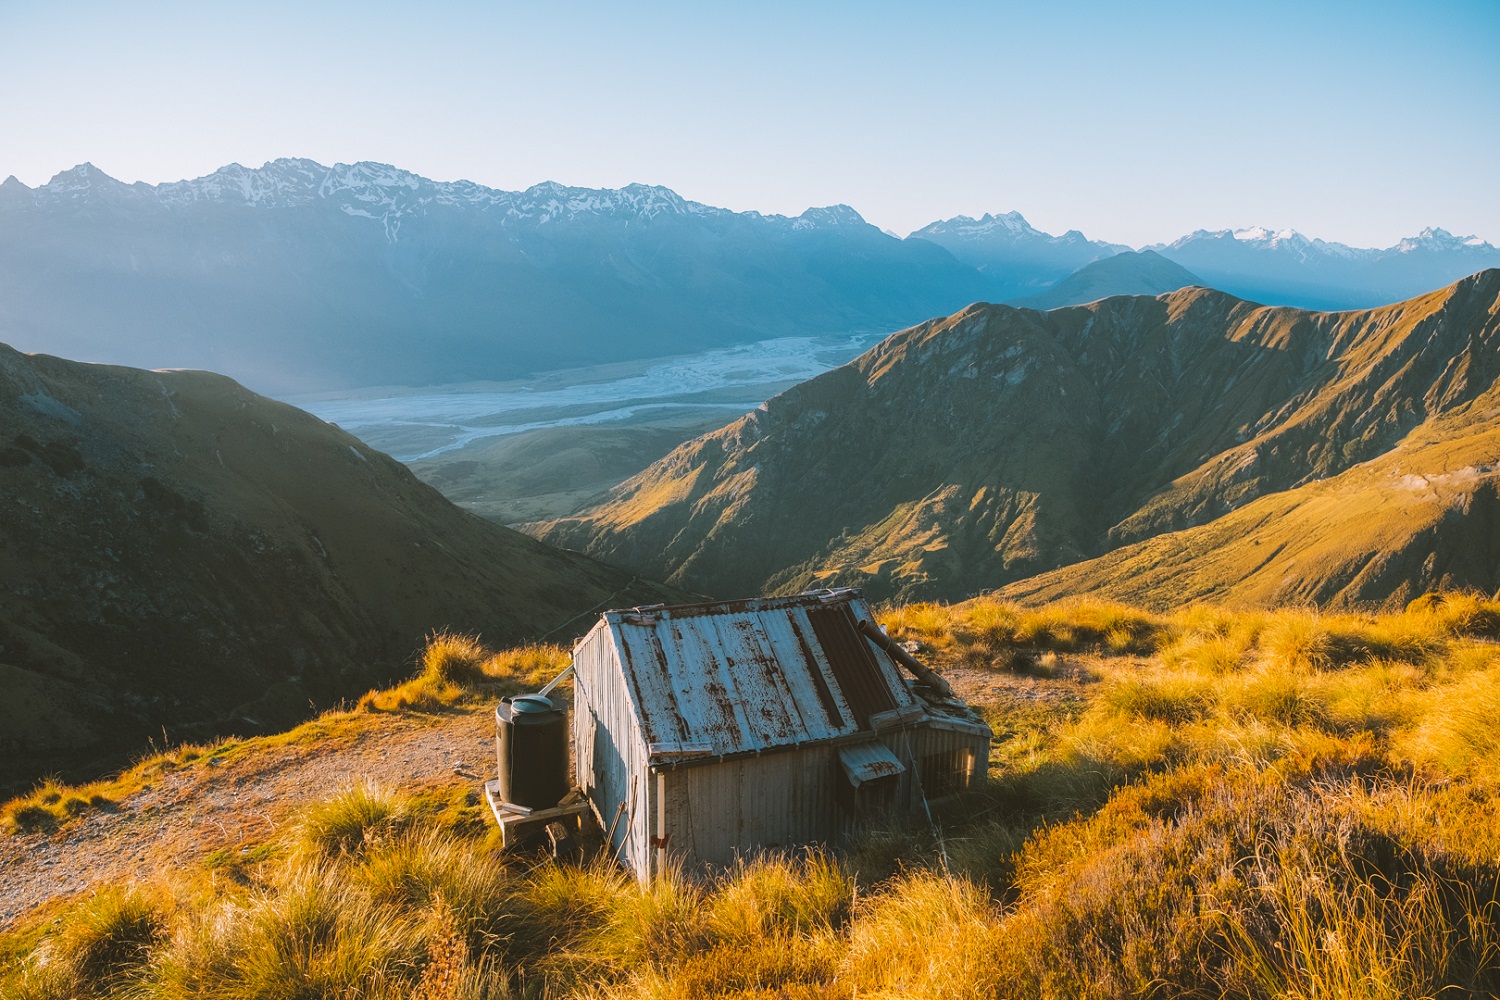 A Backcountry Hut Above The Town Of Glenorchy